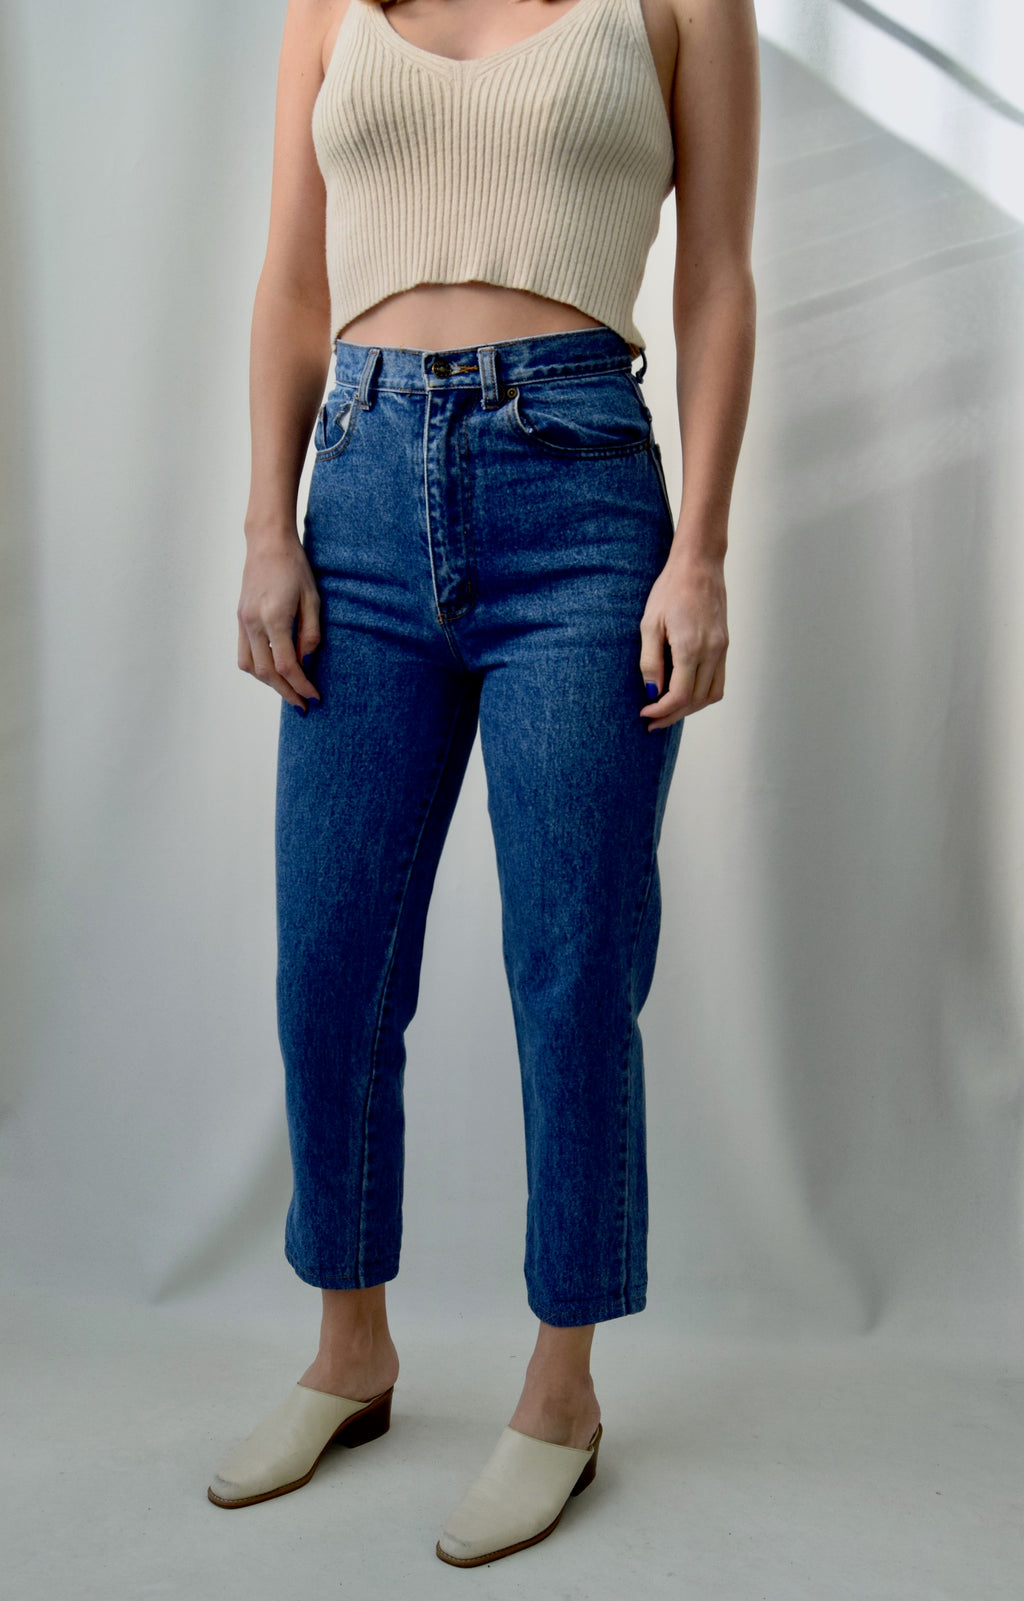 Cropped Leg 'Illegal' Jeans